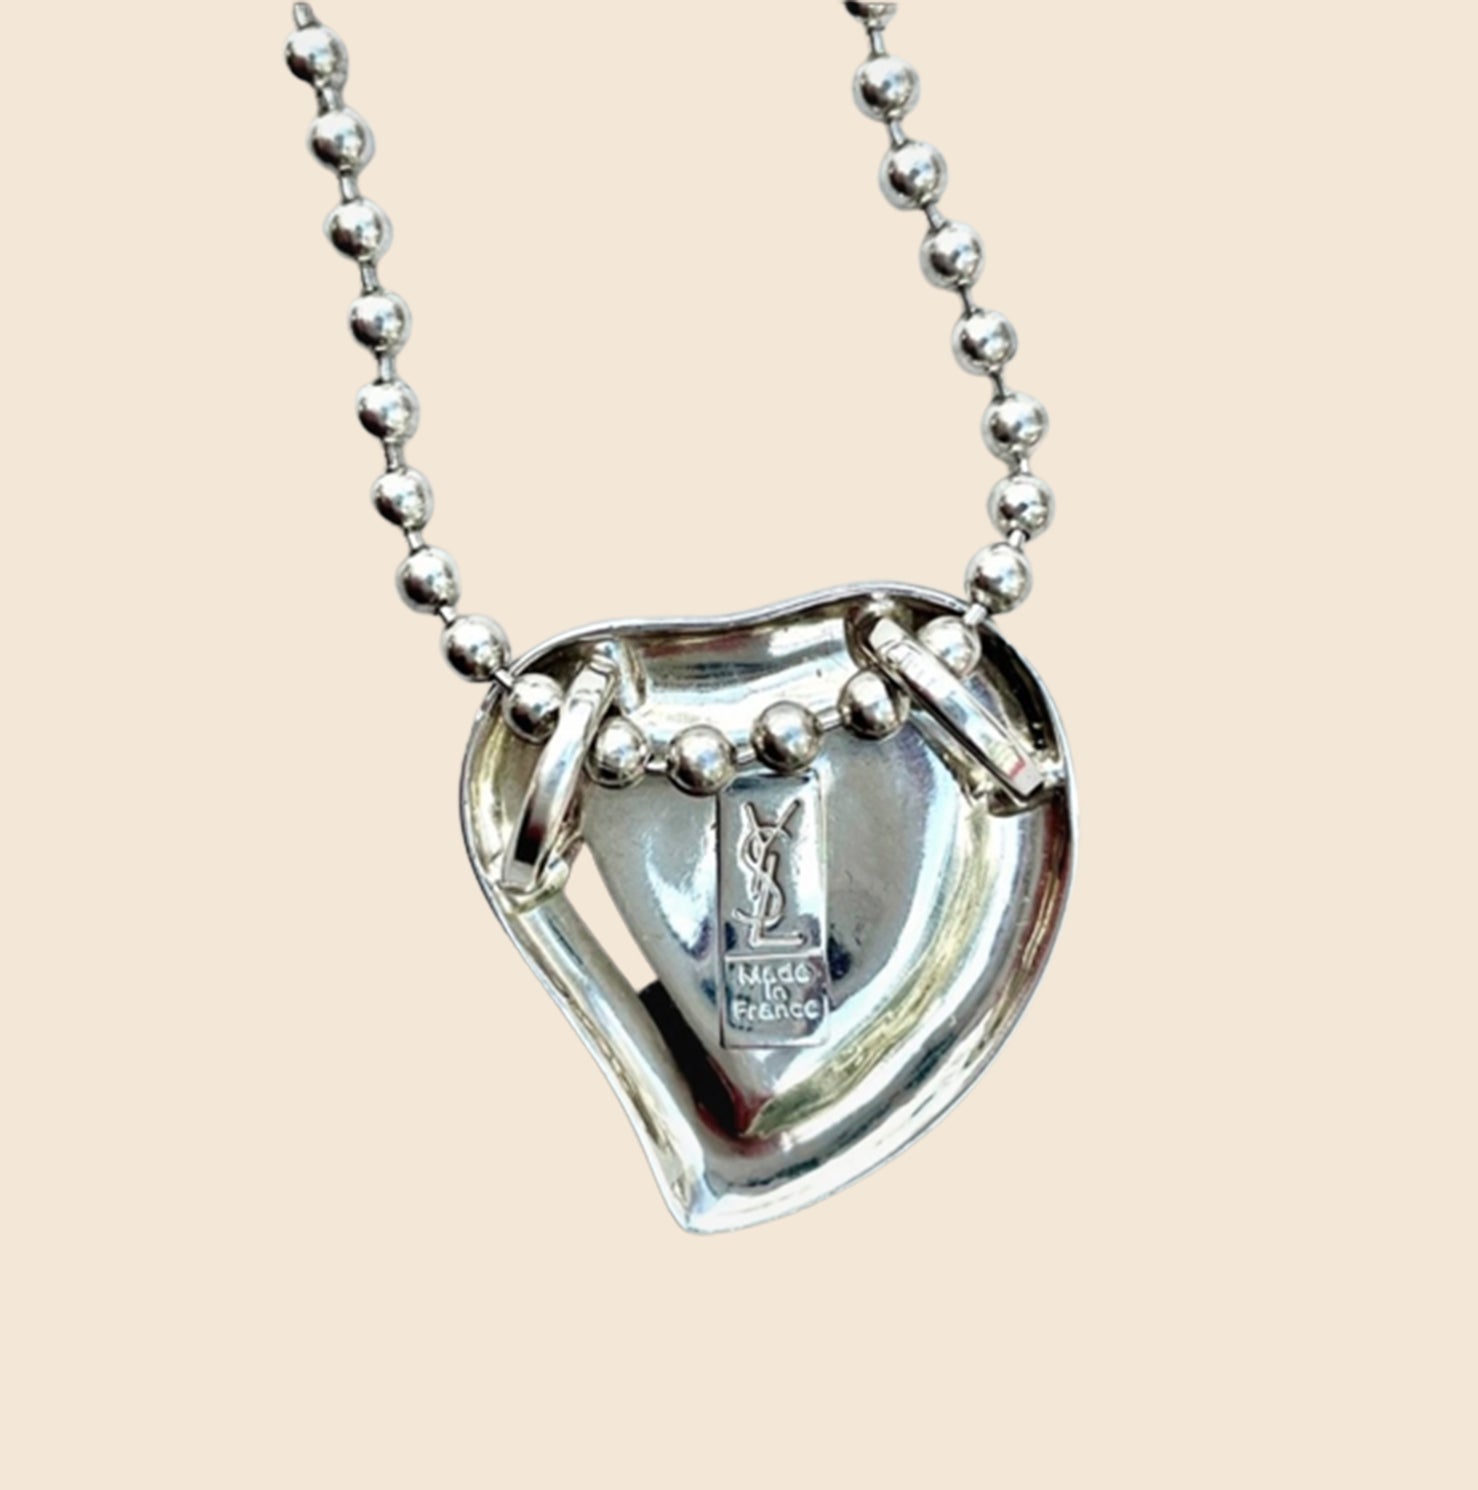 Yves Saint Laurent Strawberry Pendant Necklace  Rent Yves Saint Laurent  jewelry for $55/month